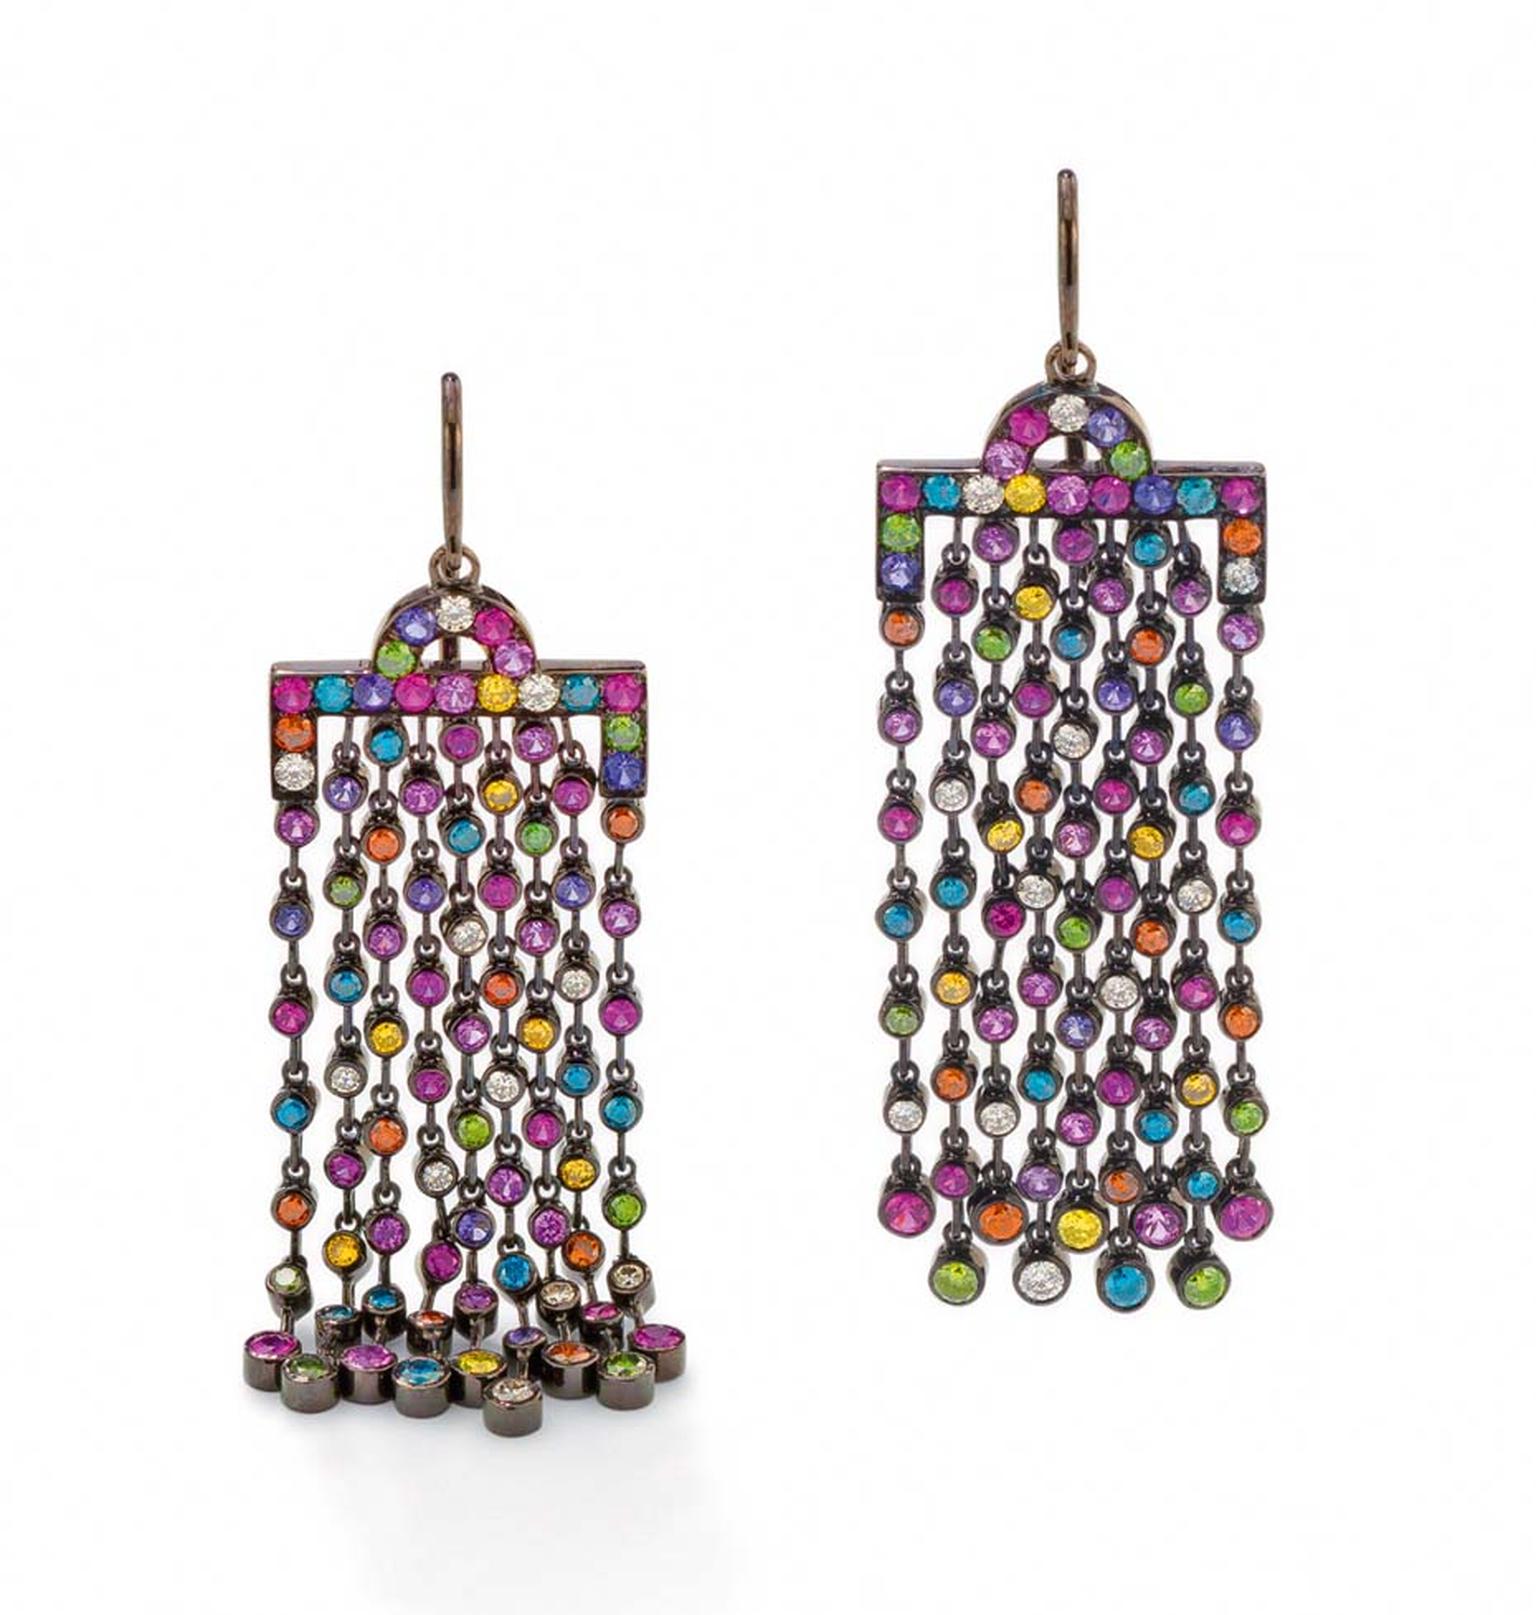 Solange Azagury-Partridge Chromatic chandelier earrings with fringes of candy-bright gems that drape down the neck - part of the Solange-curated Paddle8 auction, which runs from 5-19 May. Estimate: £12,000-£15,000. To bid now, follow the link in the artic